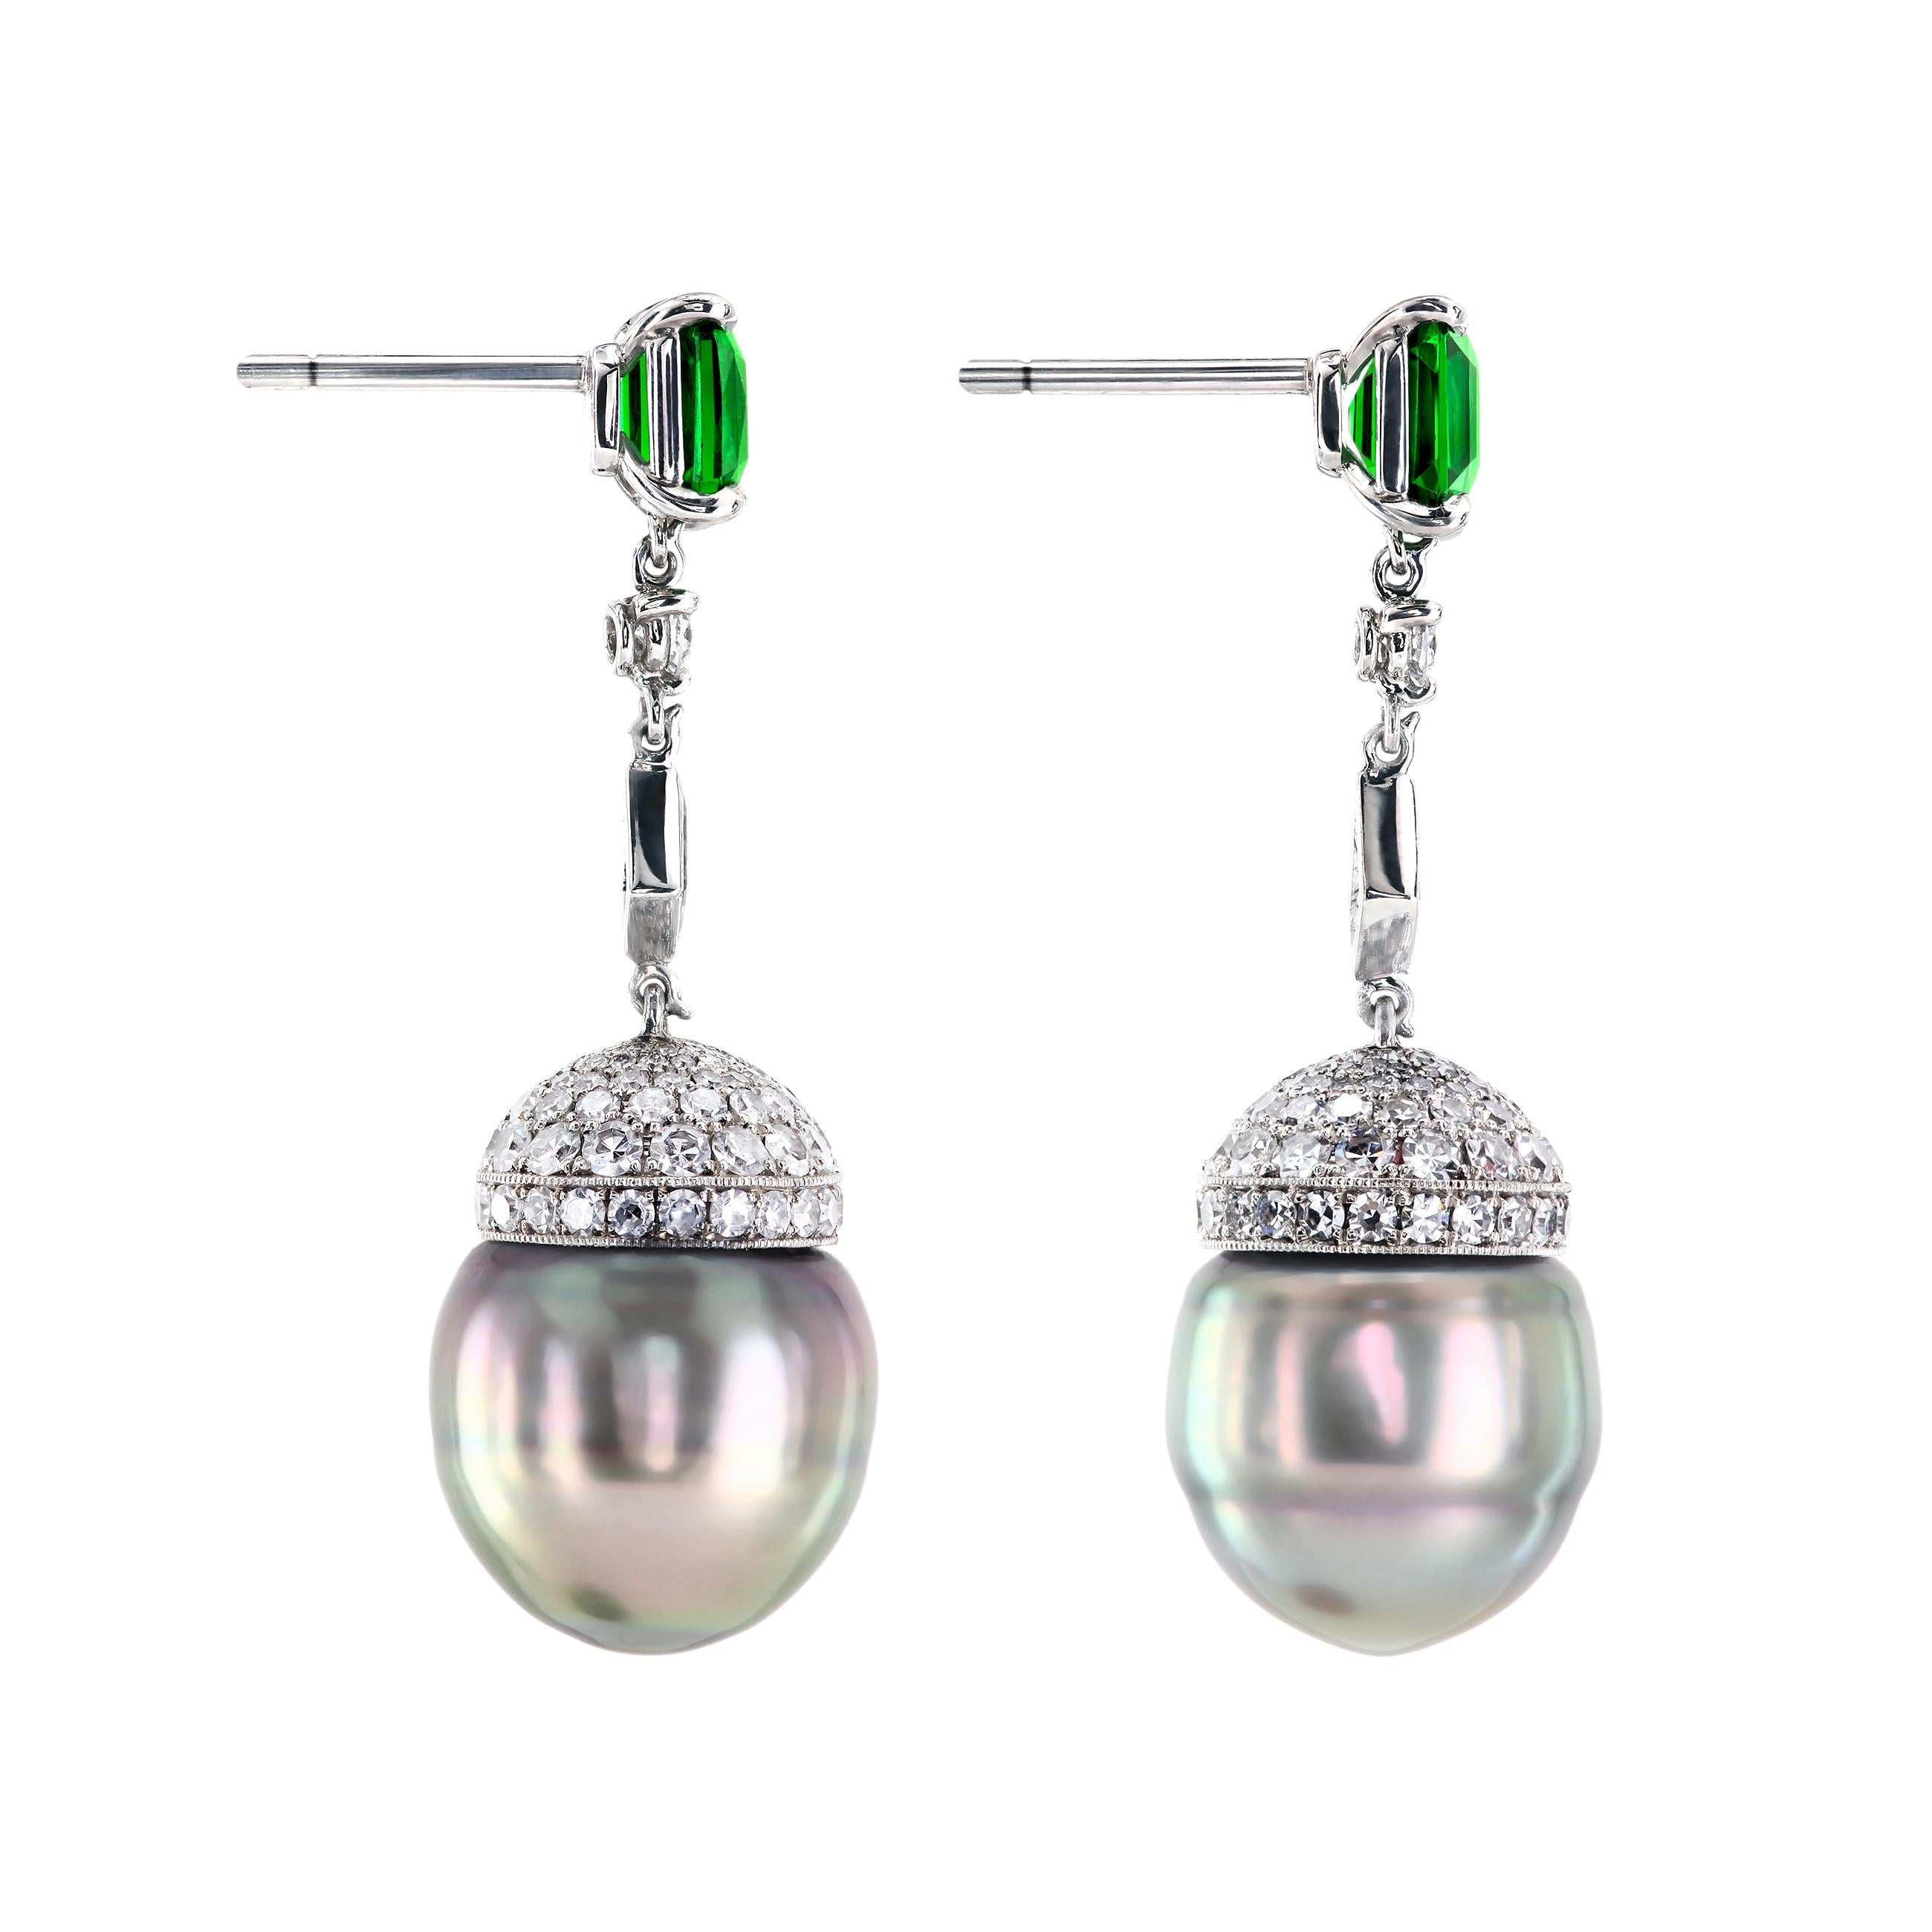 The original Leon Mege drop earrings are lighter than a feather and flexible at every joint.
Hand made in platinum in Maestro Mege studio in New York. 
The earrings are created WITHOUT the use of CAD or casting, the old-fashioned way.
The earrings